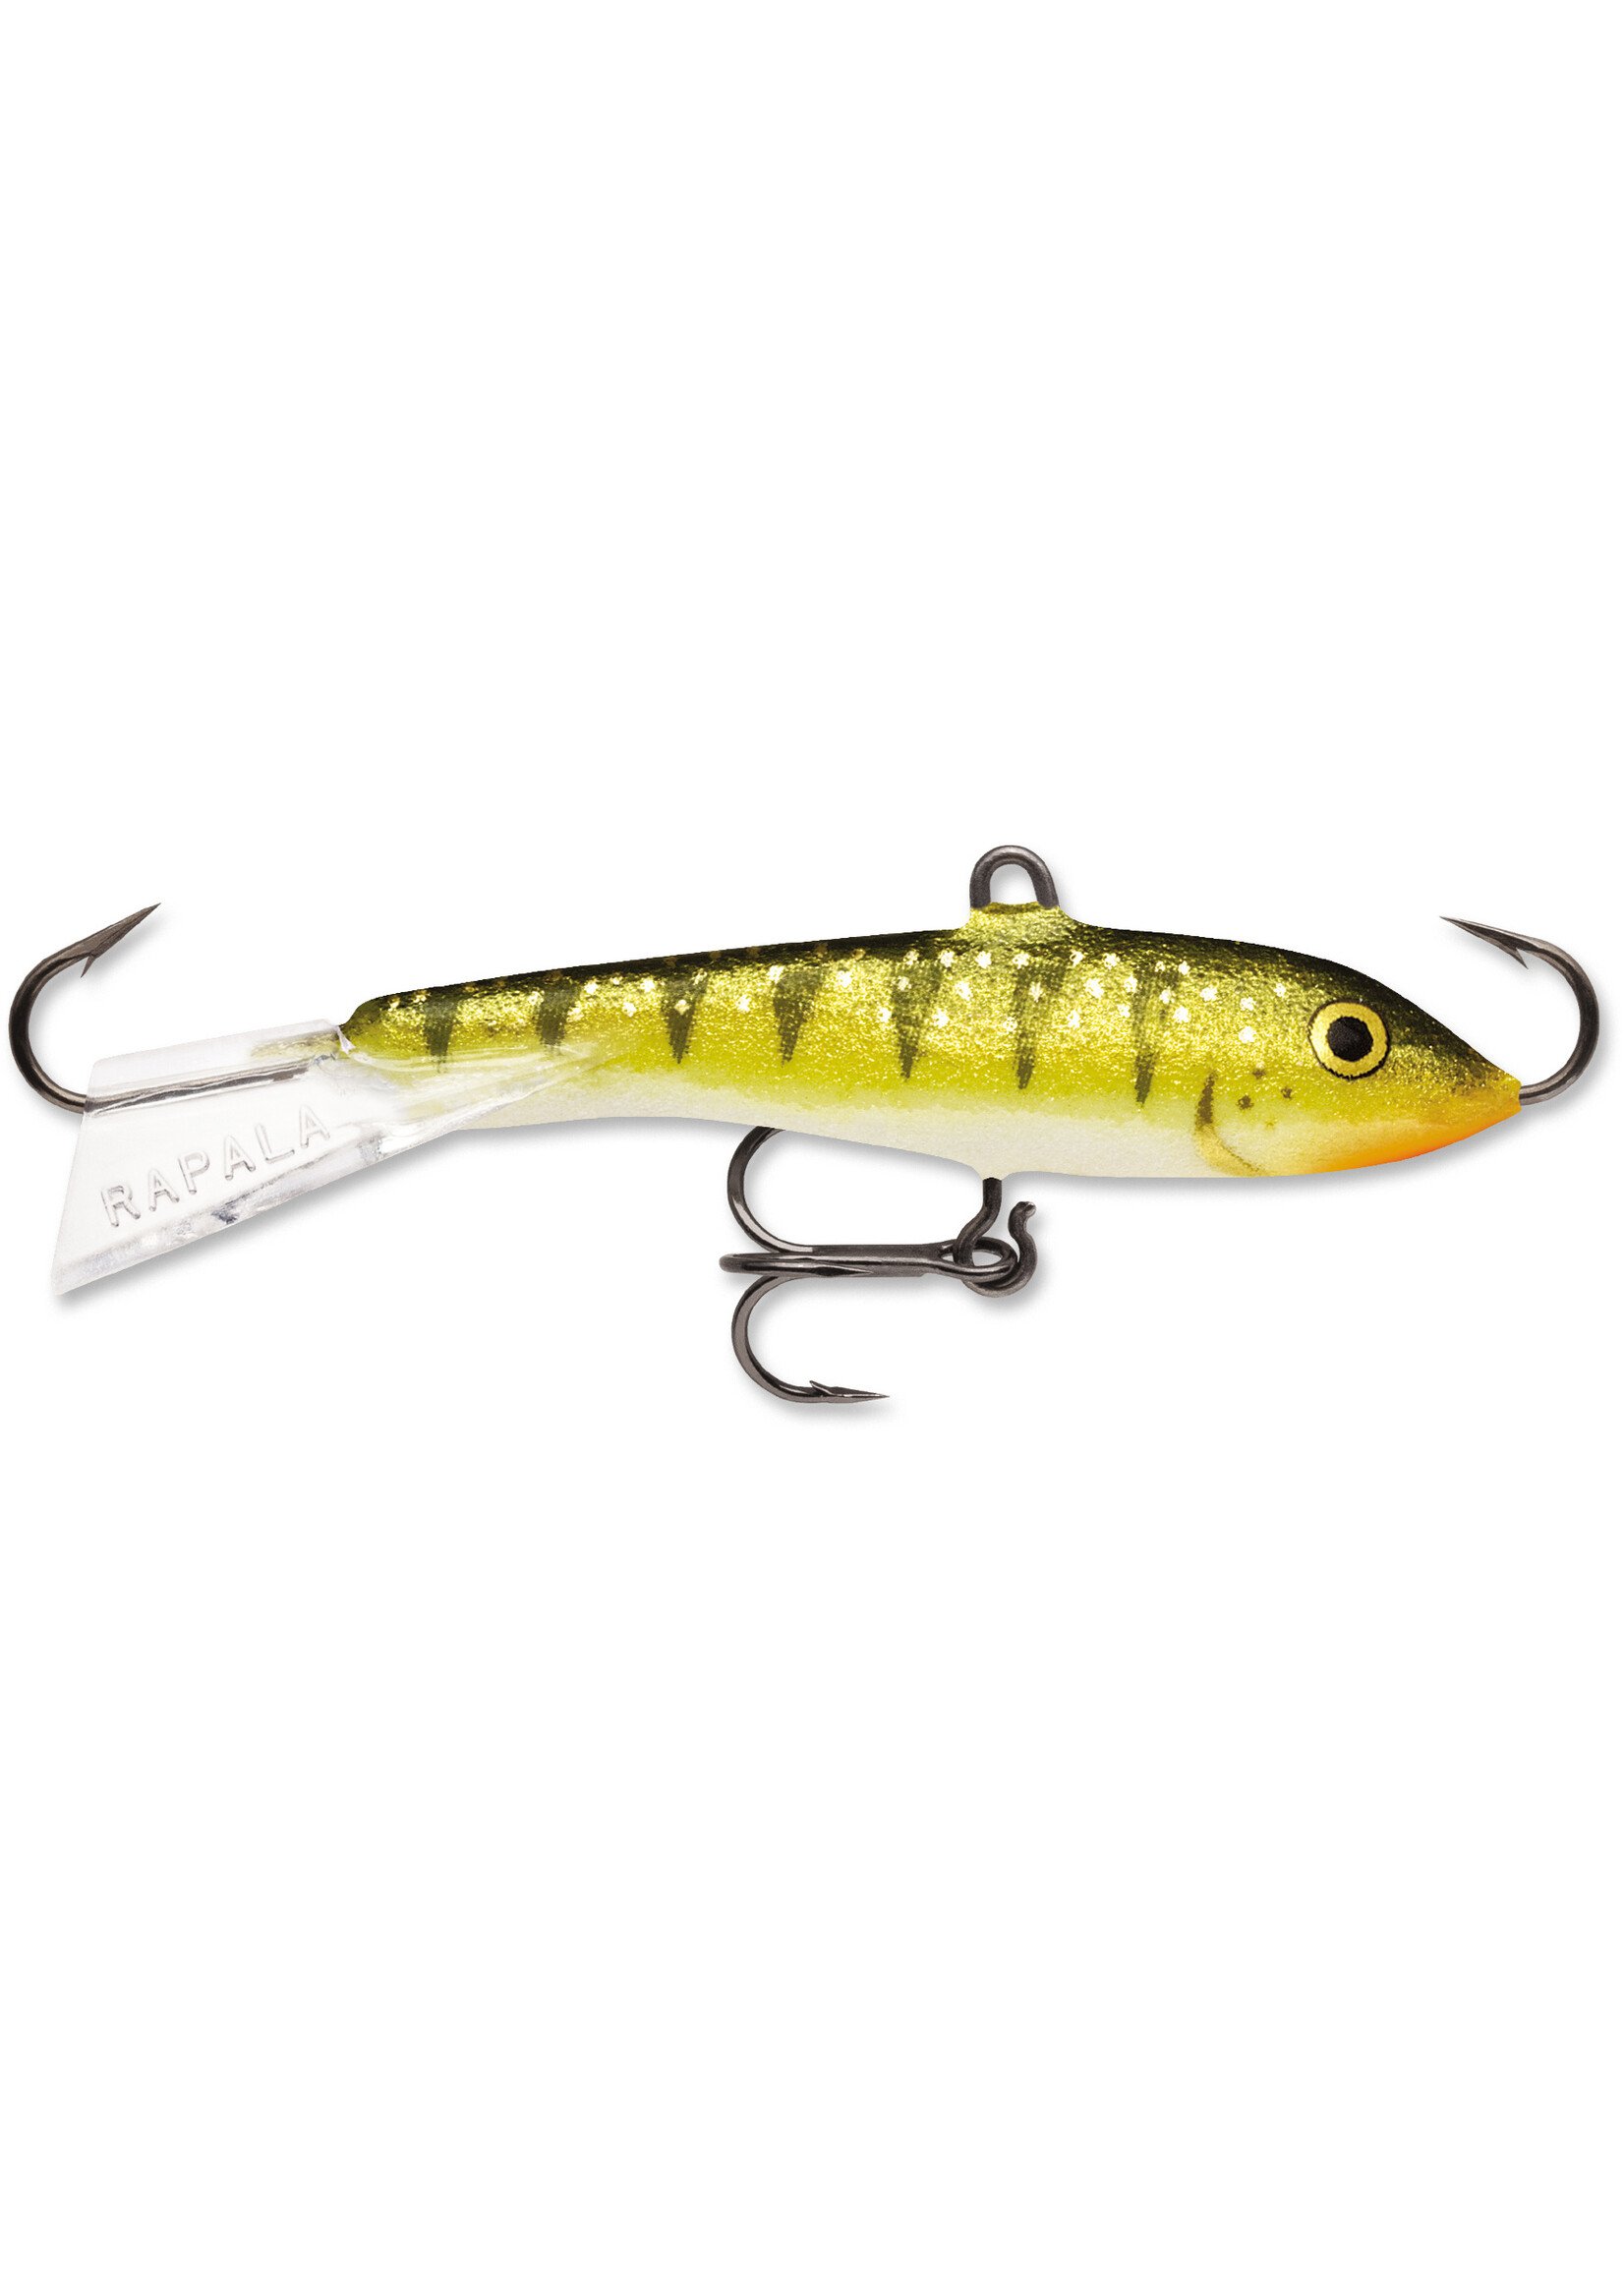 Rapala Perch Freshwater Fishing Baits, Lures & Flies for sale